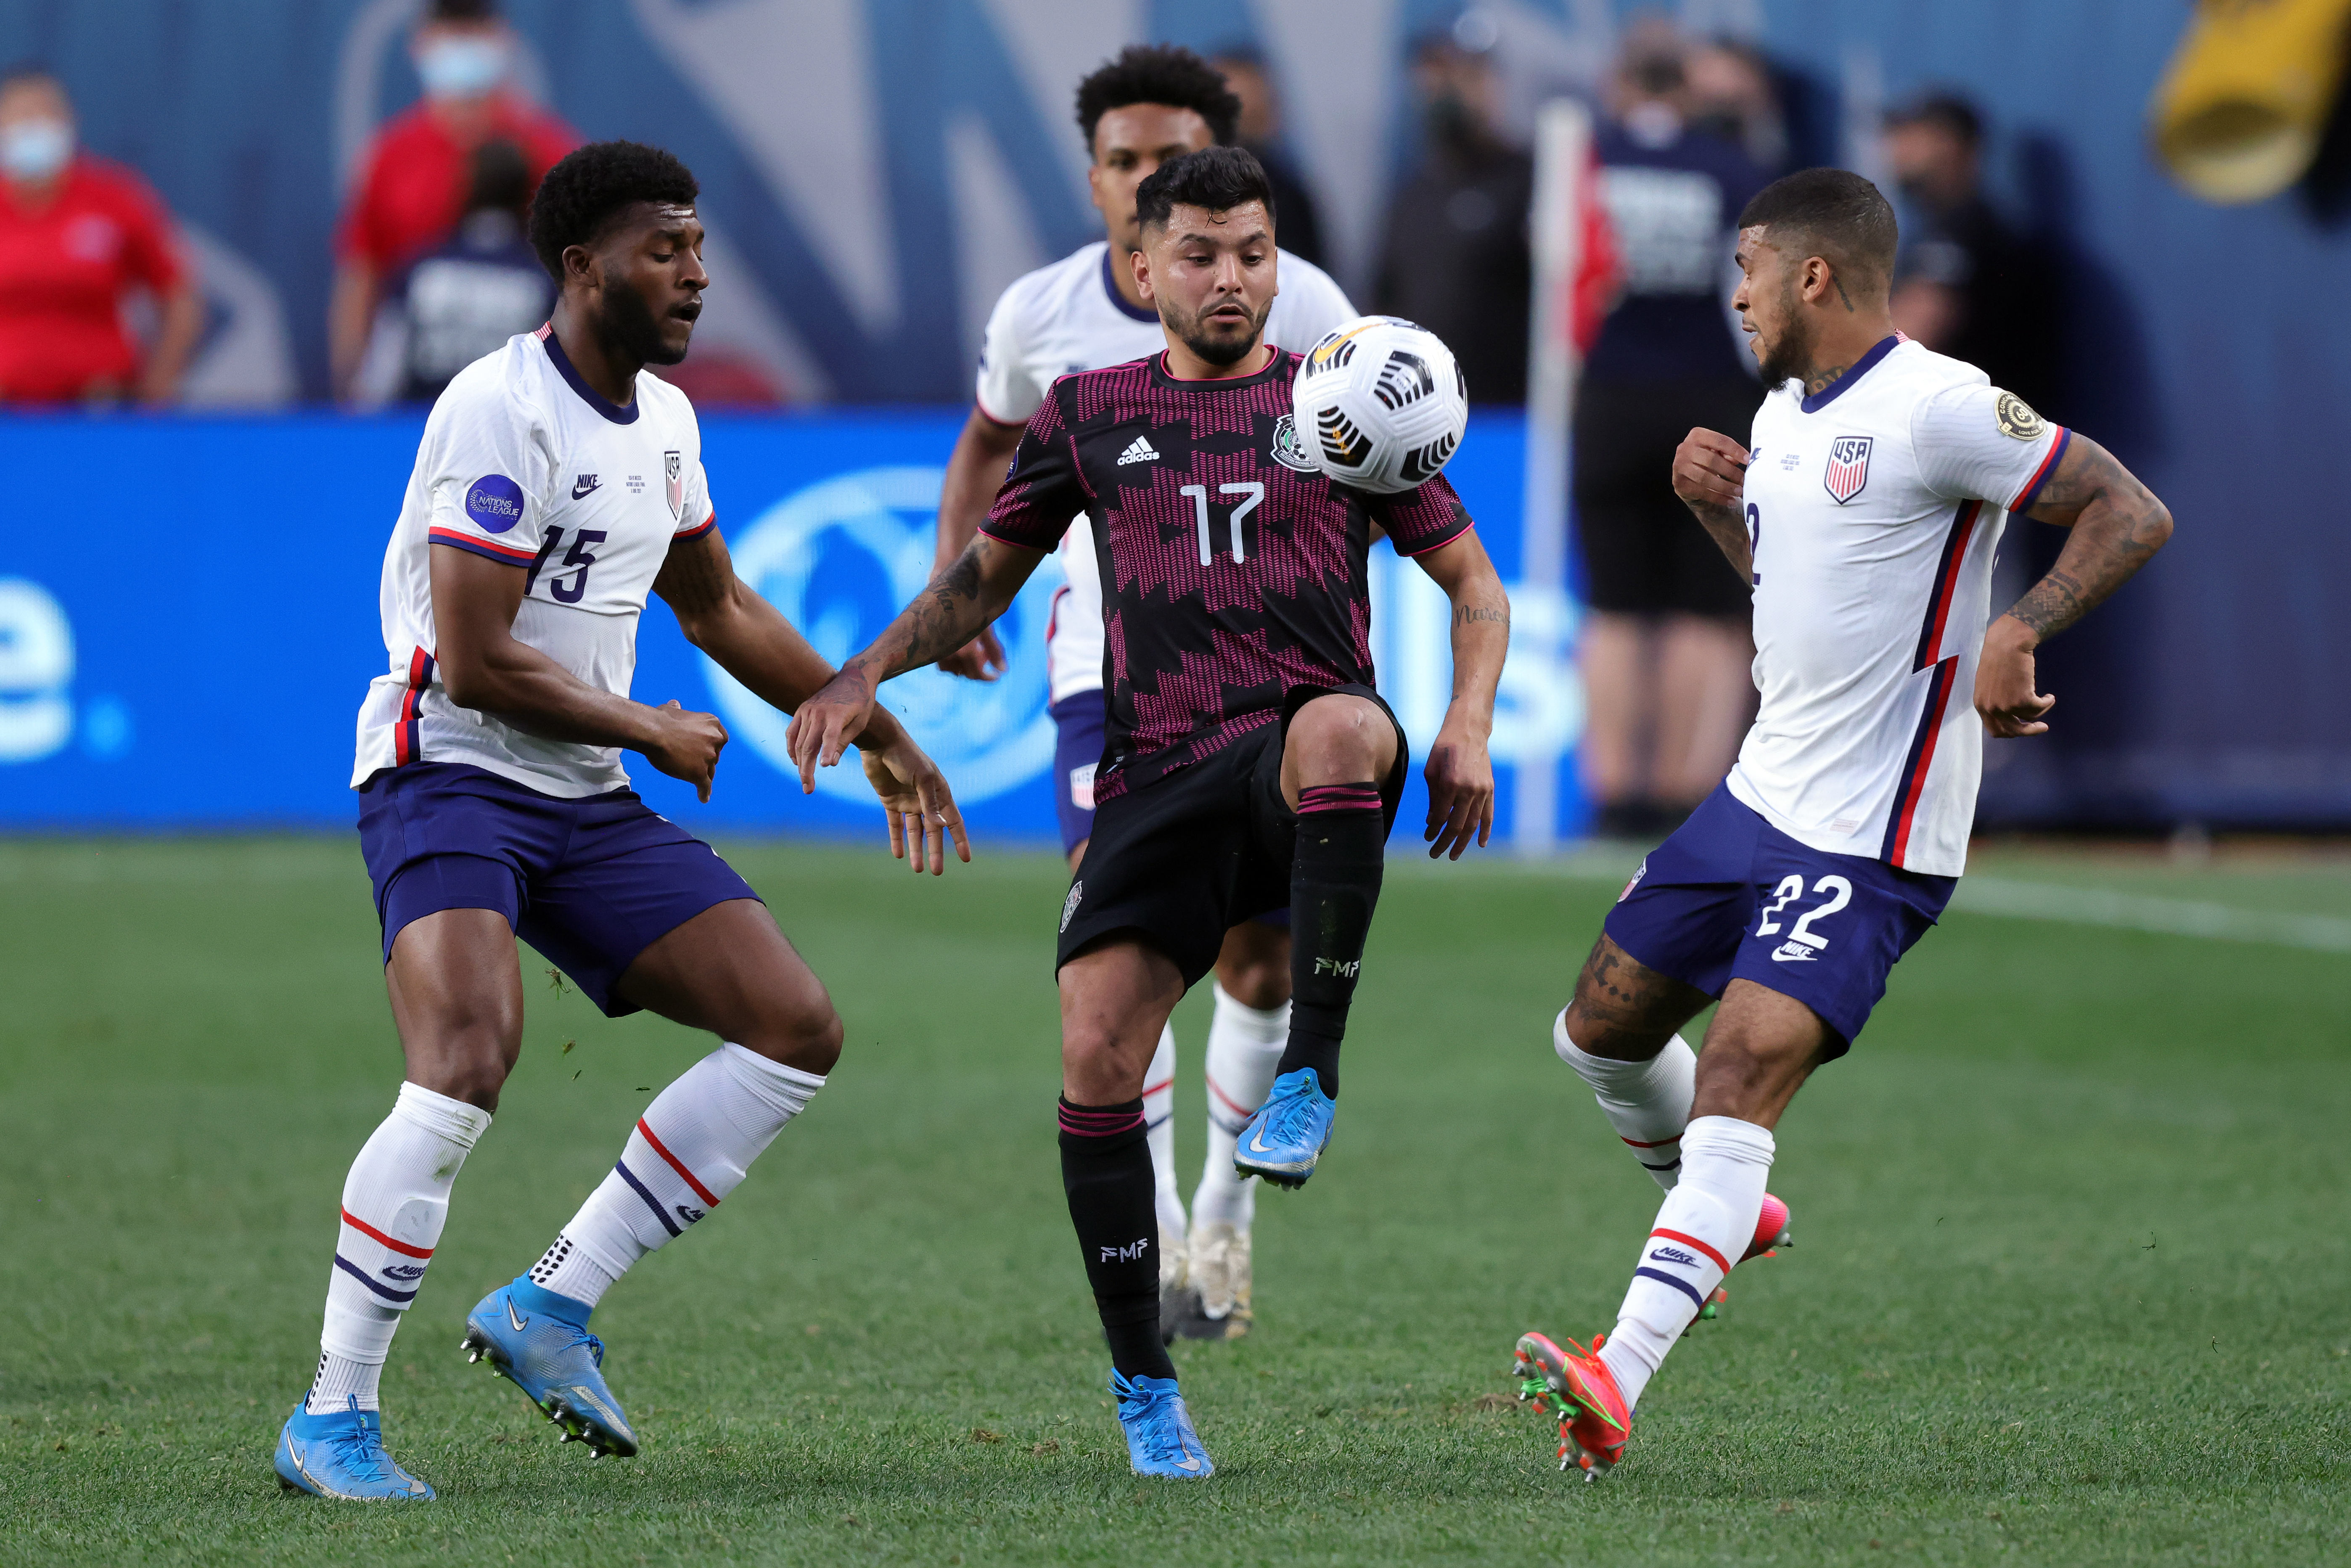 SOCCER: JUN 06 Concacaf Nations League Final - Mexico v United States